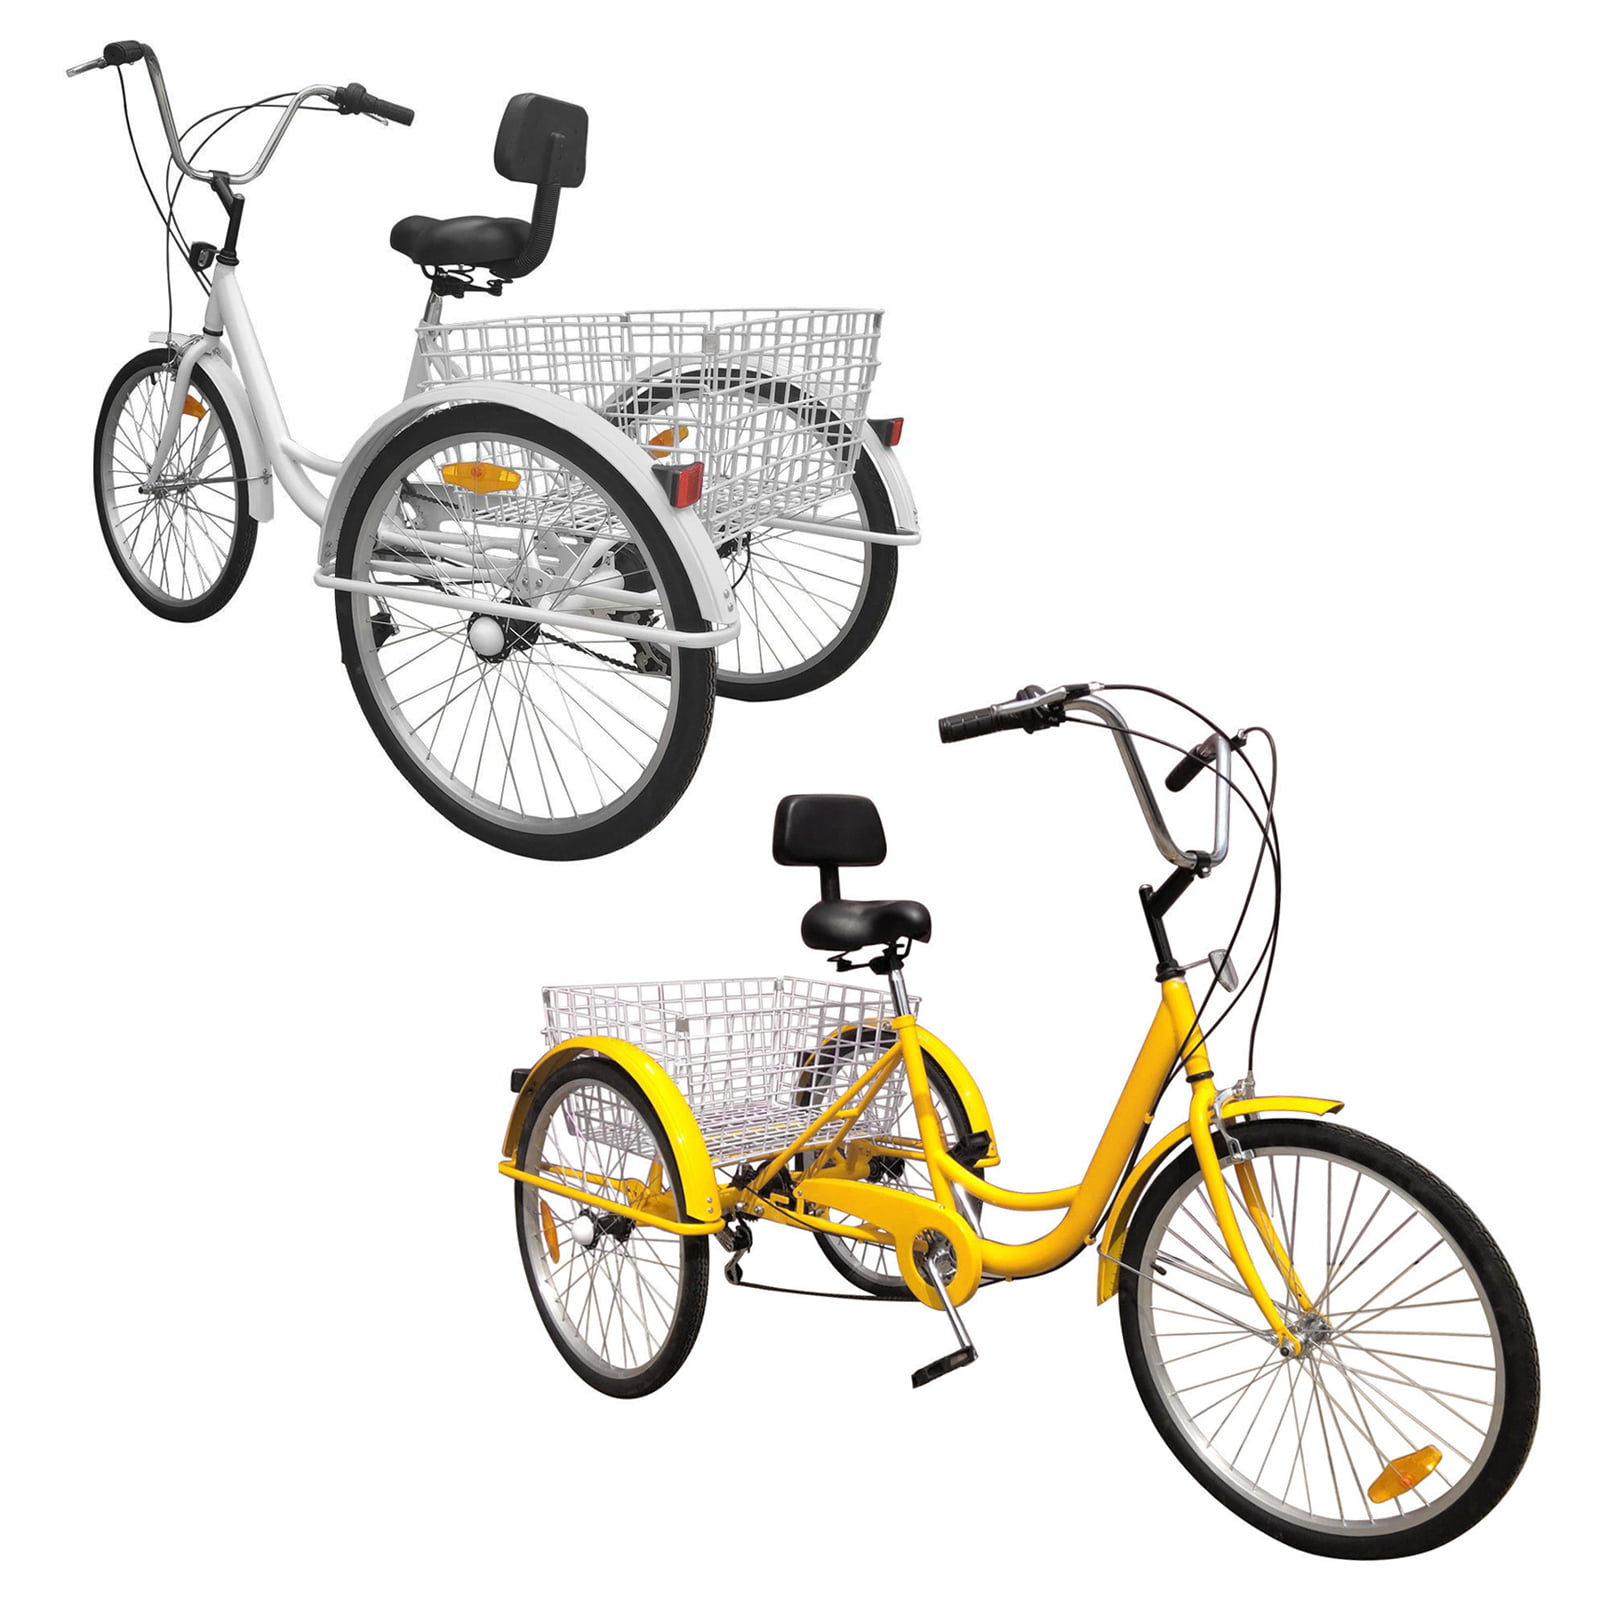 Details about   24" Adult Tricycle 7-Speed 3 Wheel Trike Cruiser Bicycle w/Basket Shopping Green 